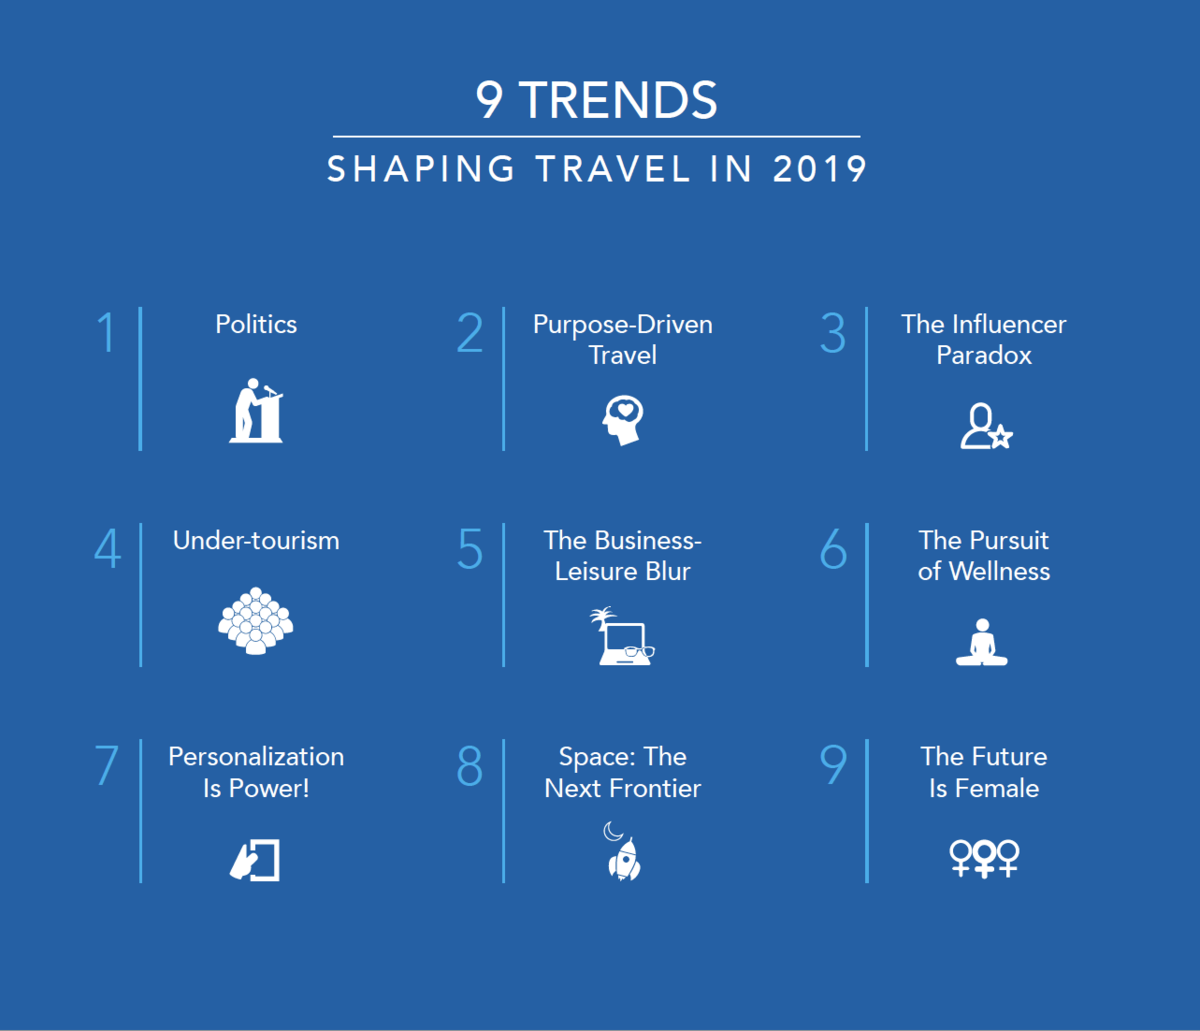 4 travel and tourism trends